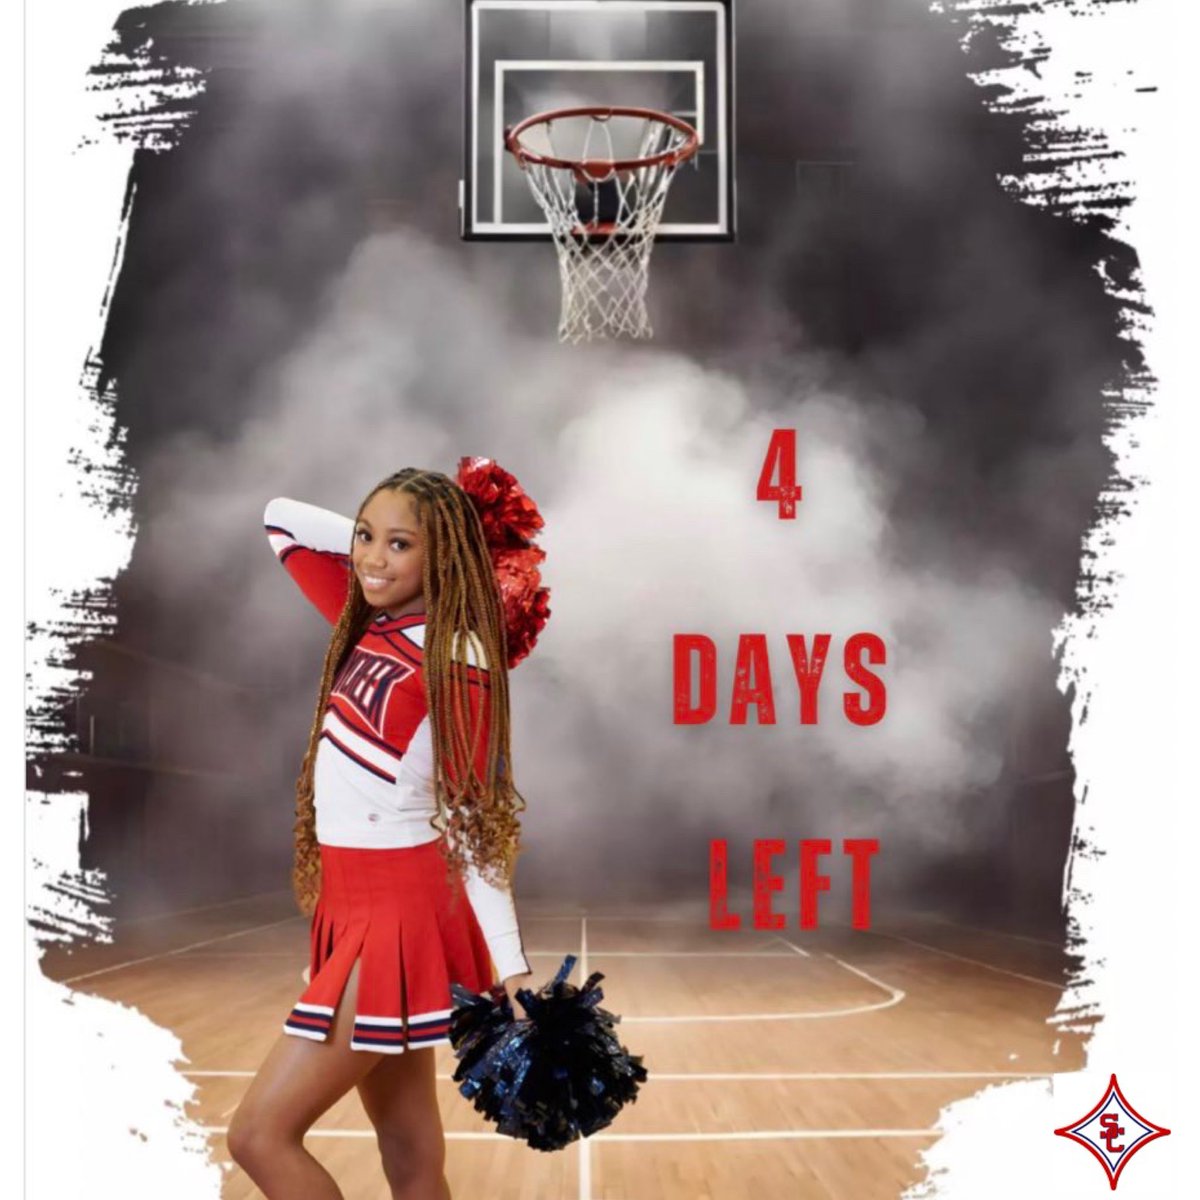 4️⃣ days left until Senior Night, Friday, 2/9/2024! Counting down the days until the spotlight shines on our Cheer 📣 and Basketball 🏀 Seniors! #blackgirlscheer #dance #creeklife #competitiveadvantage #sandycreek #gocreek #schscheer #basketballcheer #basketball #sandycreekcheer